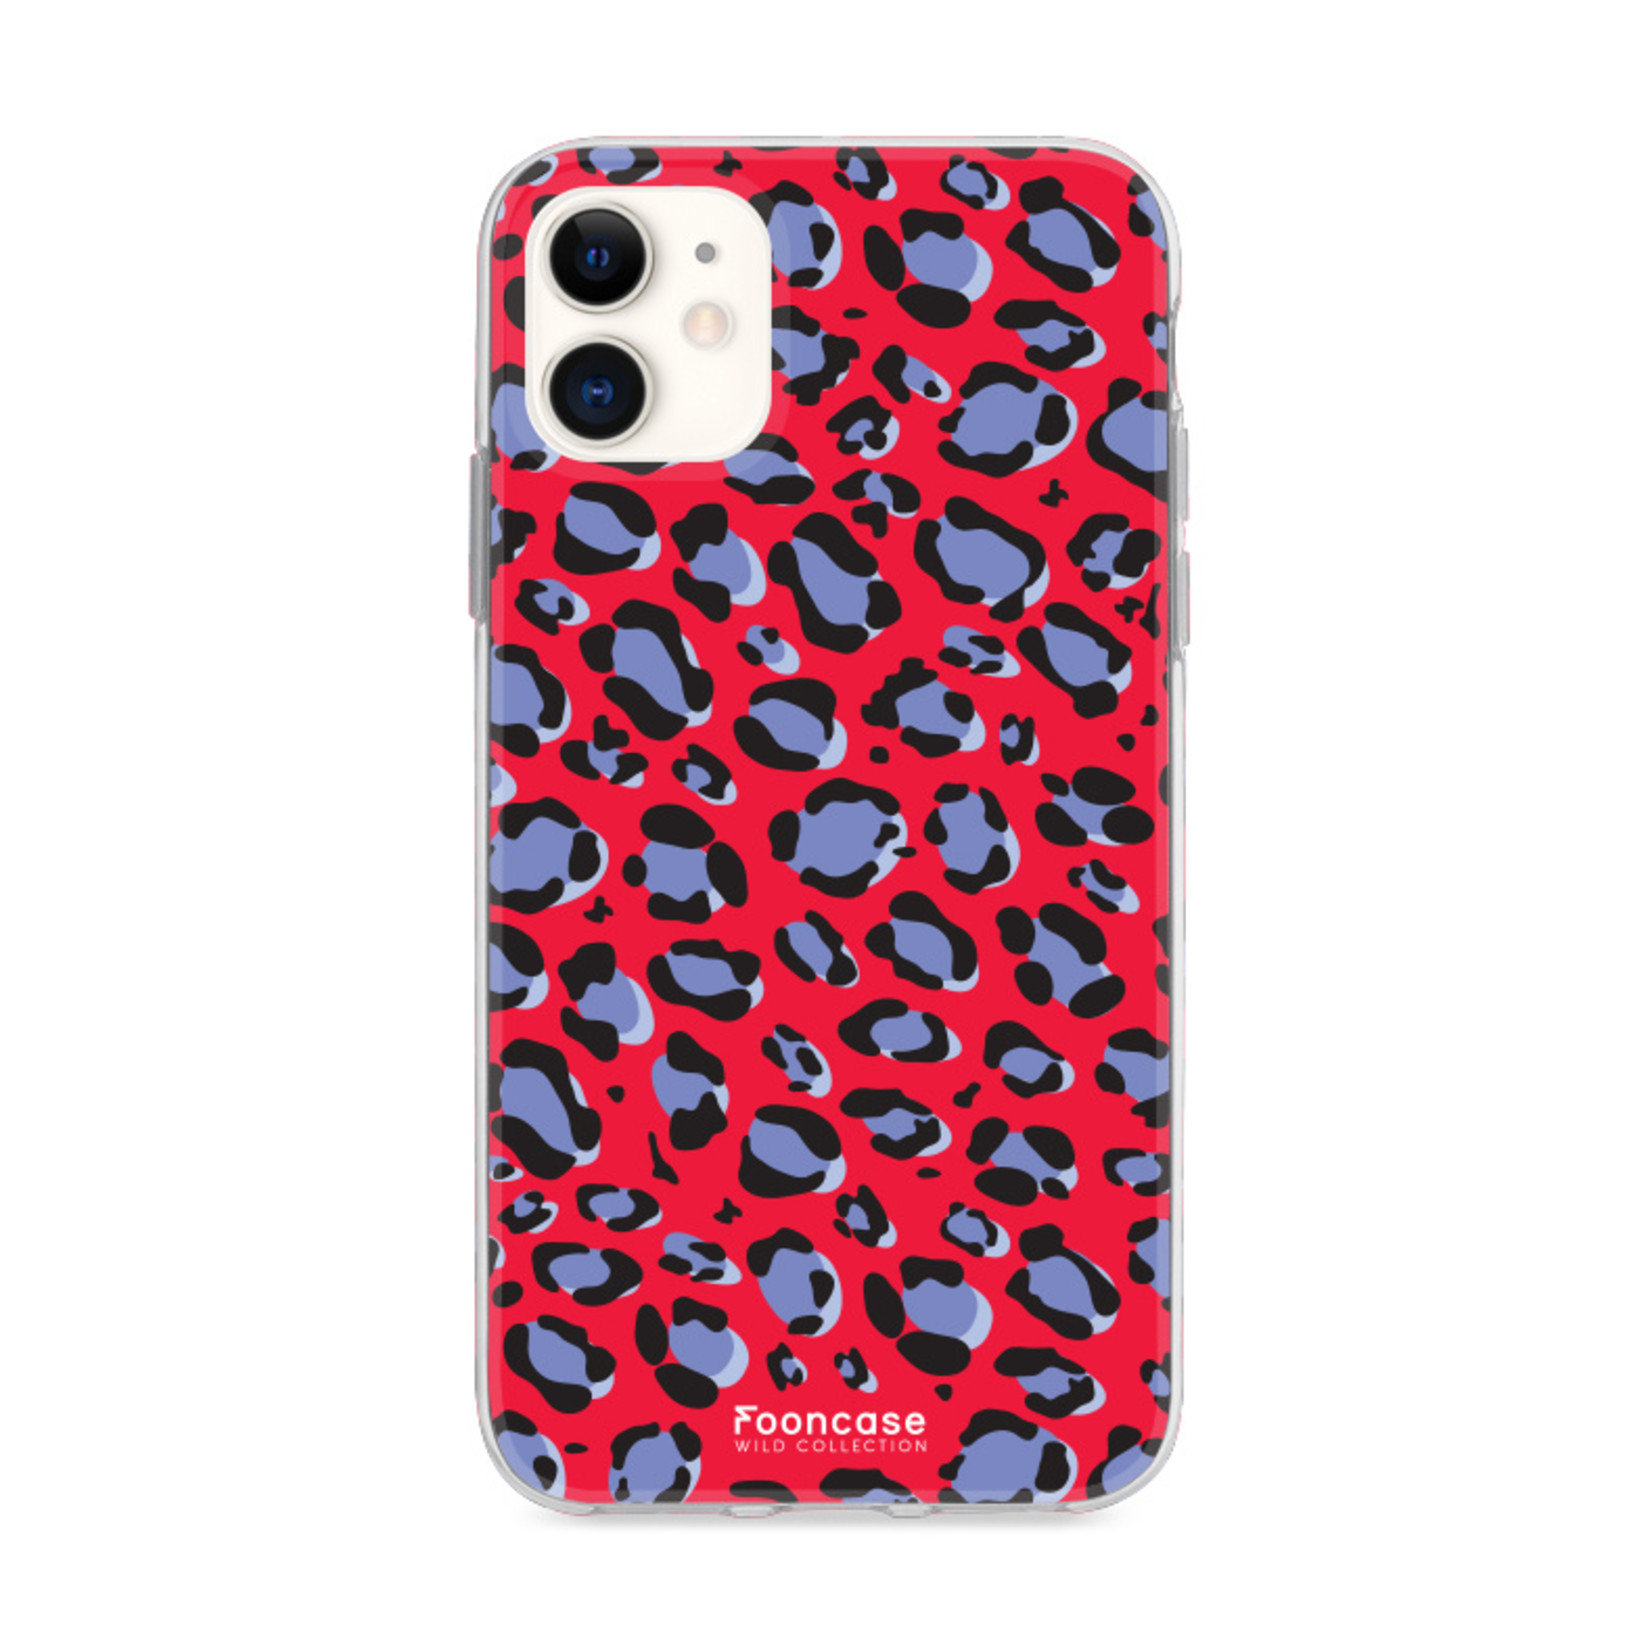 FOONCASE Iphone 12 - WILD COLLECTION / Rosso